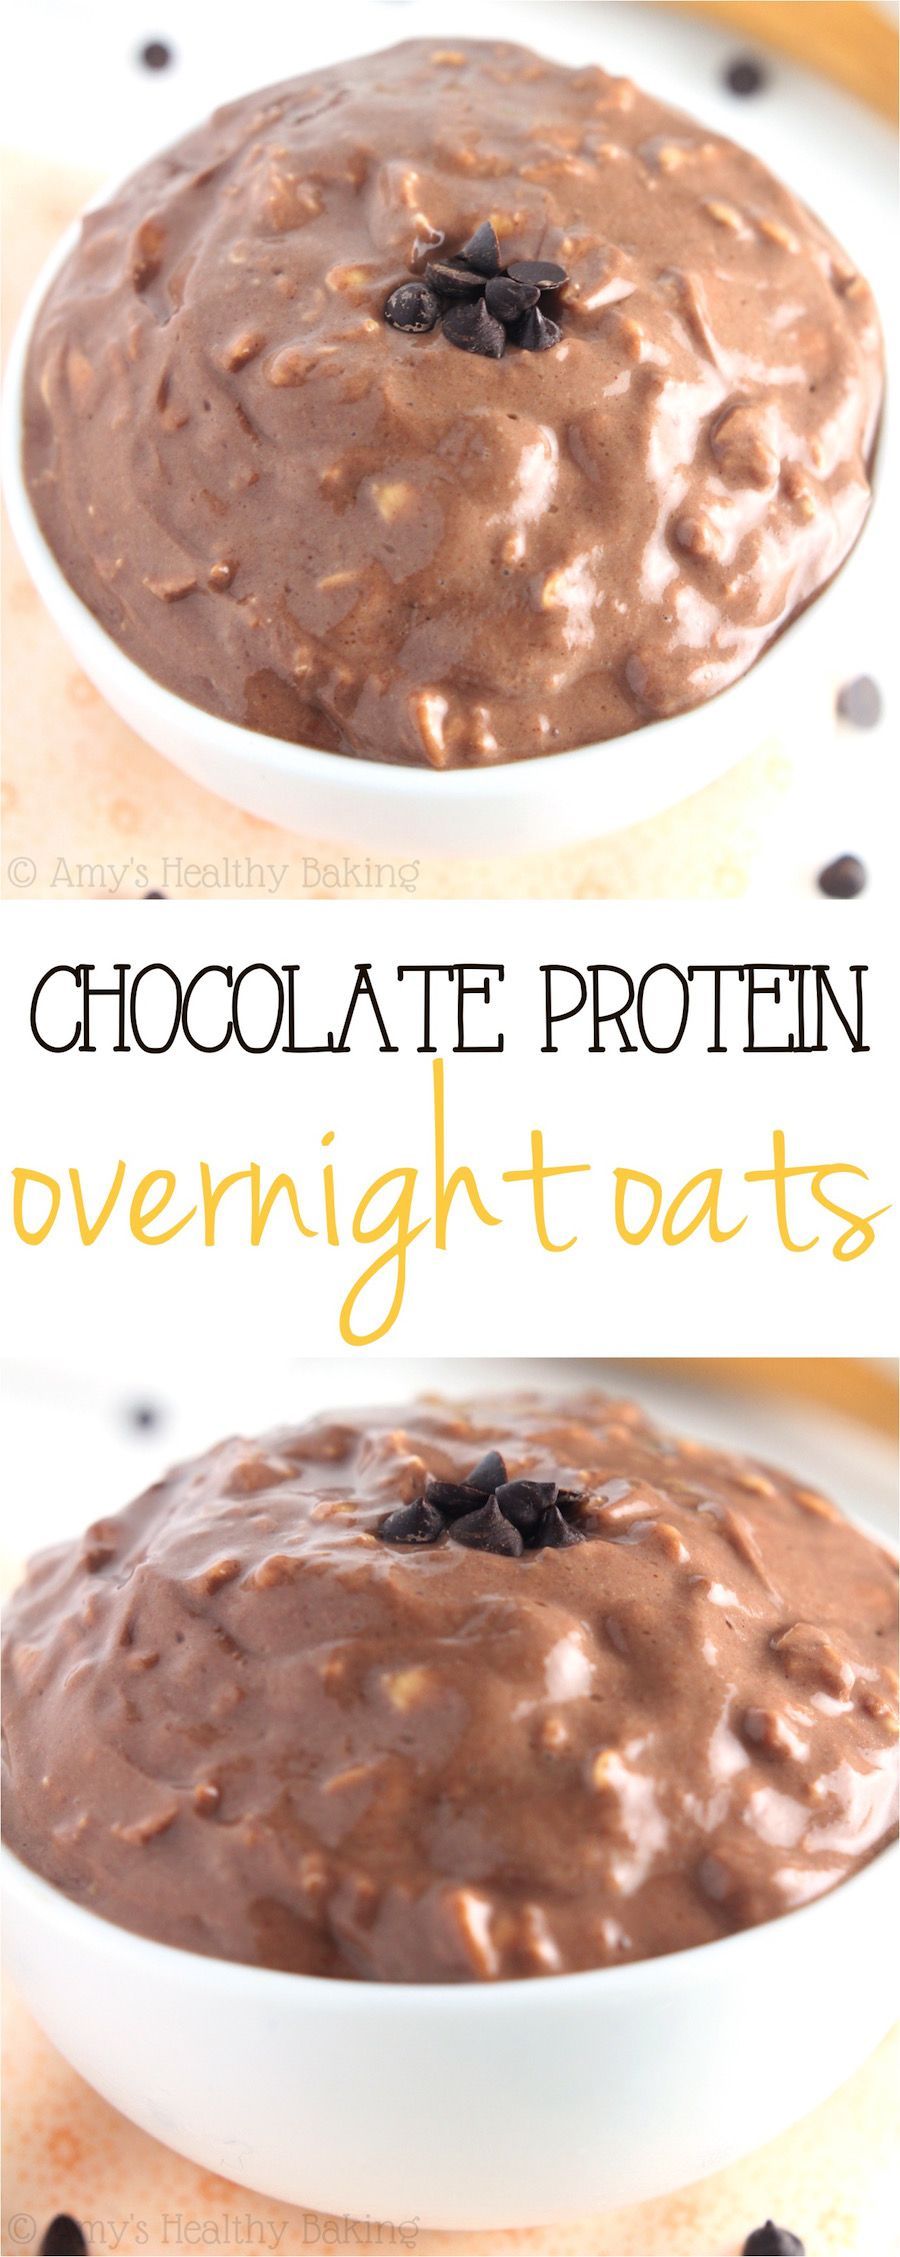 Chocolate Protein Overnight Oats — just 5 healthy ingredients! They taste like a cross between hot chocolate & fudgy brownies!